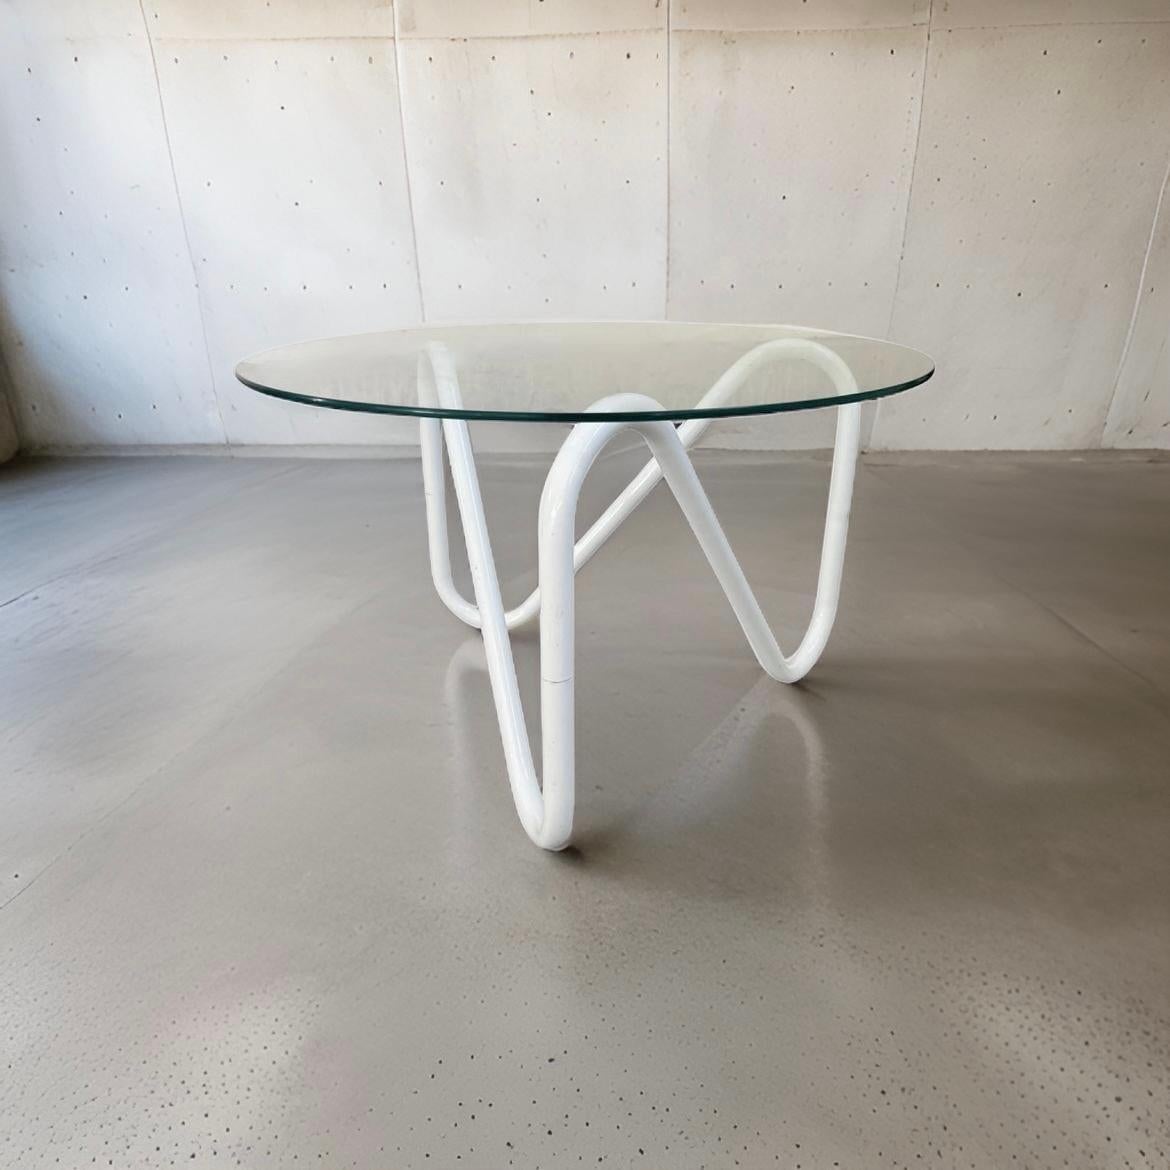 Vintage Tubular Squiggle Metal Coffee Table with Original Glass Top.  Supposedly from the 70s or 80s, the curved metal feels modern and fresh.  It makes a big impact with a minimal silhouette. 

24” Diameter x 14.5” Height